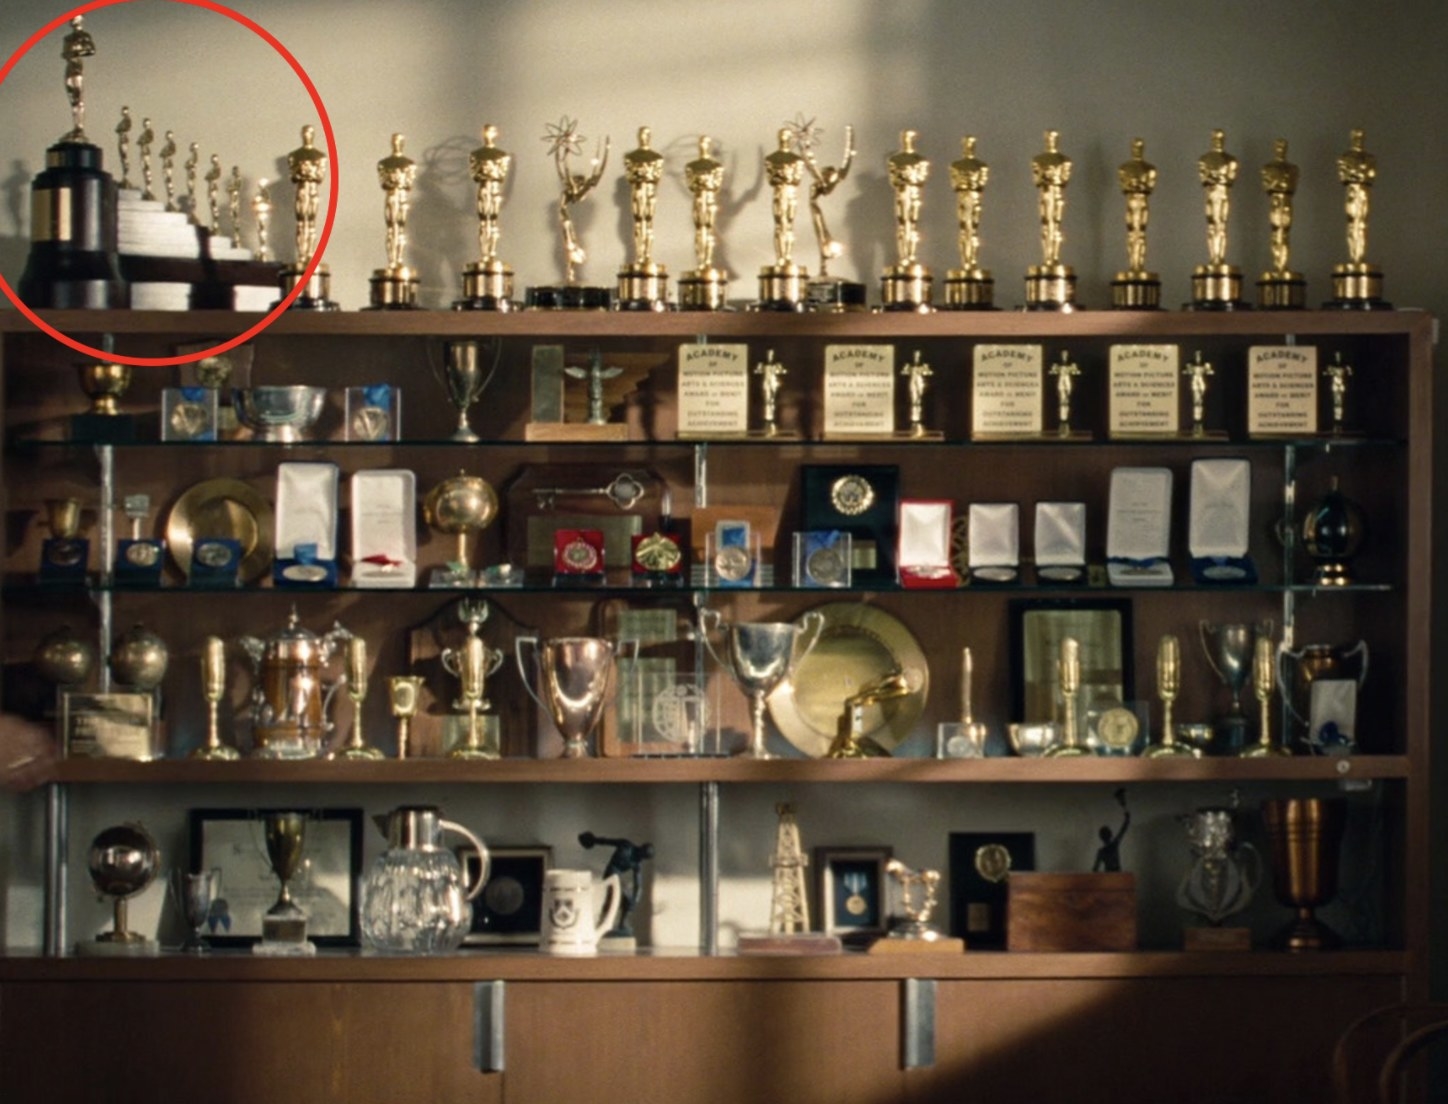 The smaller Oscars are on a shelf of awards